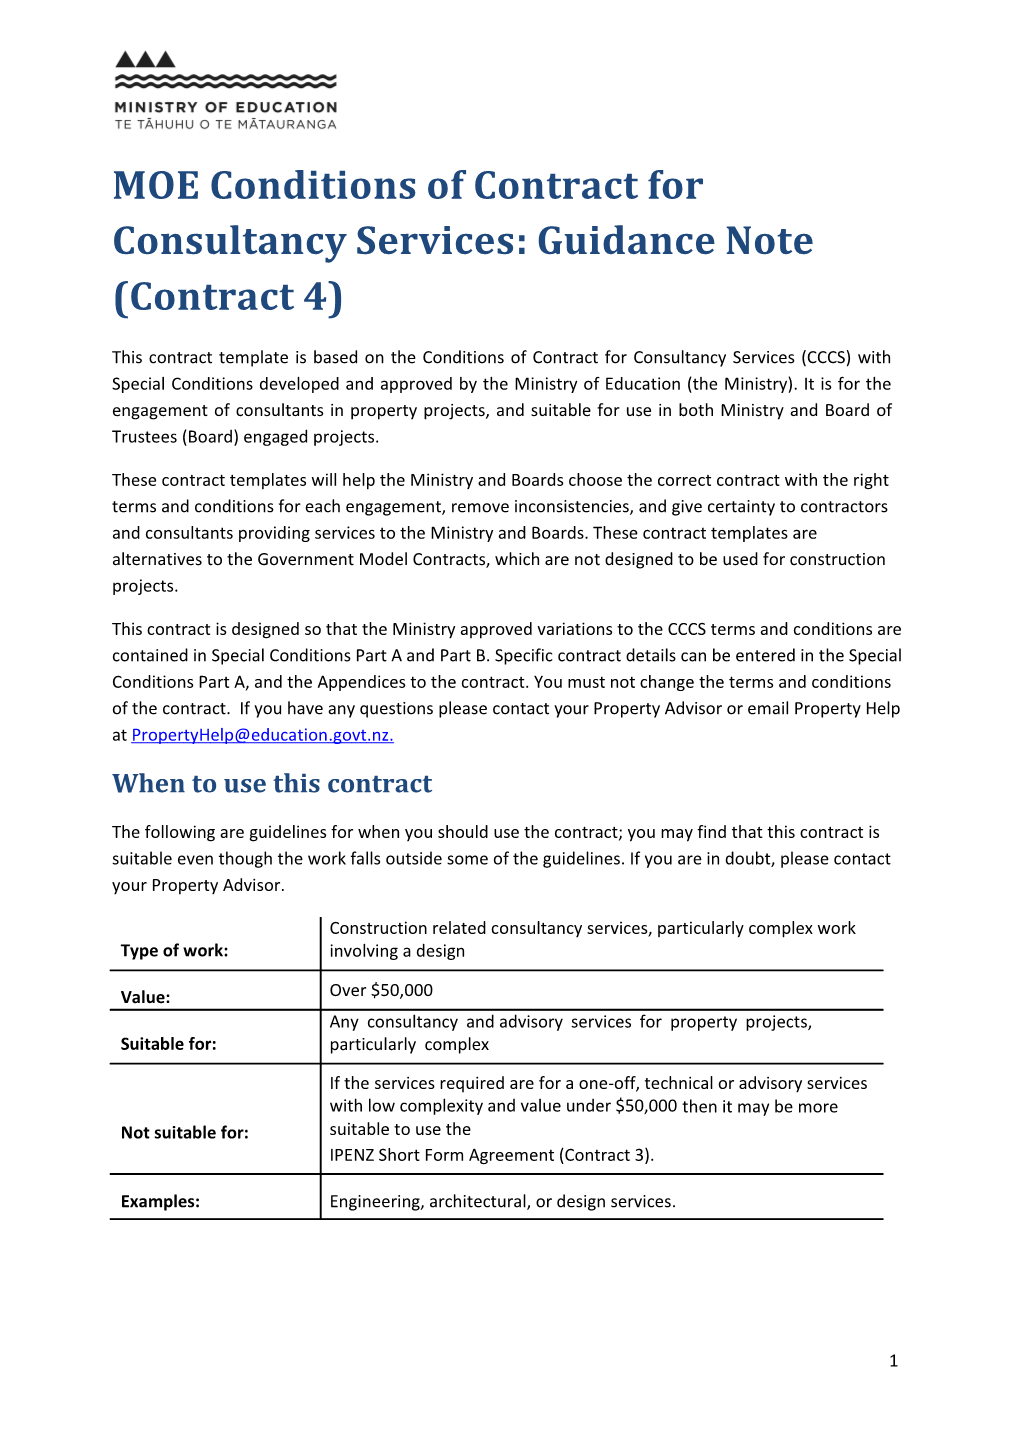 MOE Conditions of Contract for Consultancy Services - Guidance Note for Contract 4